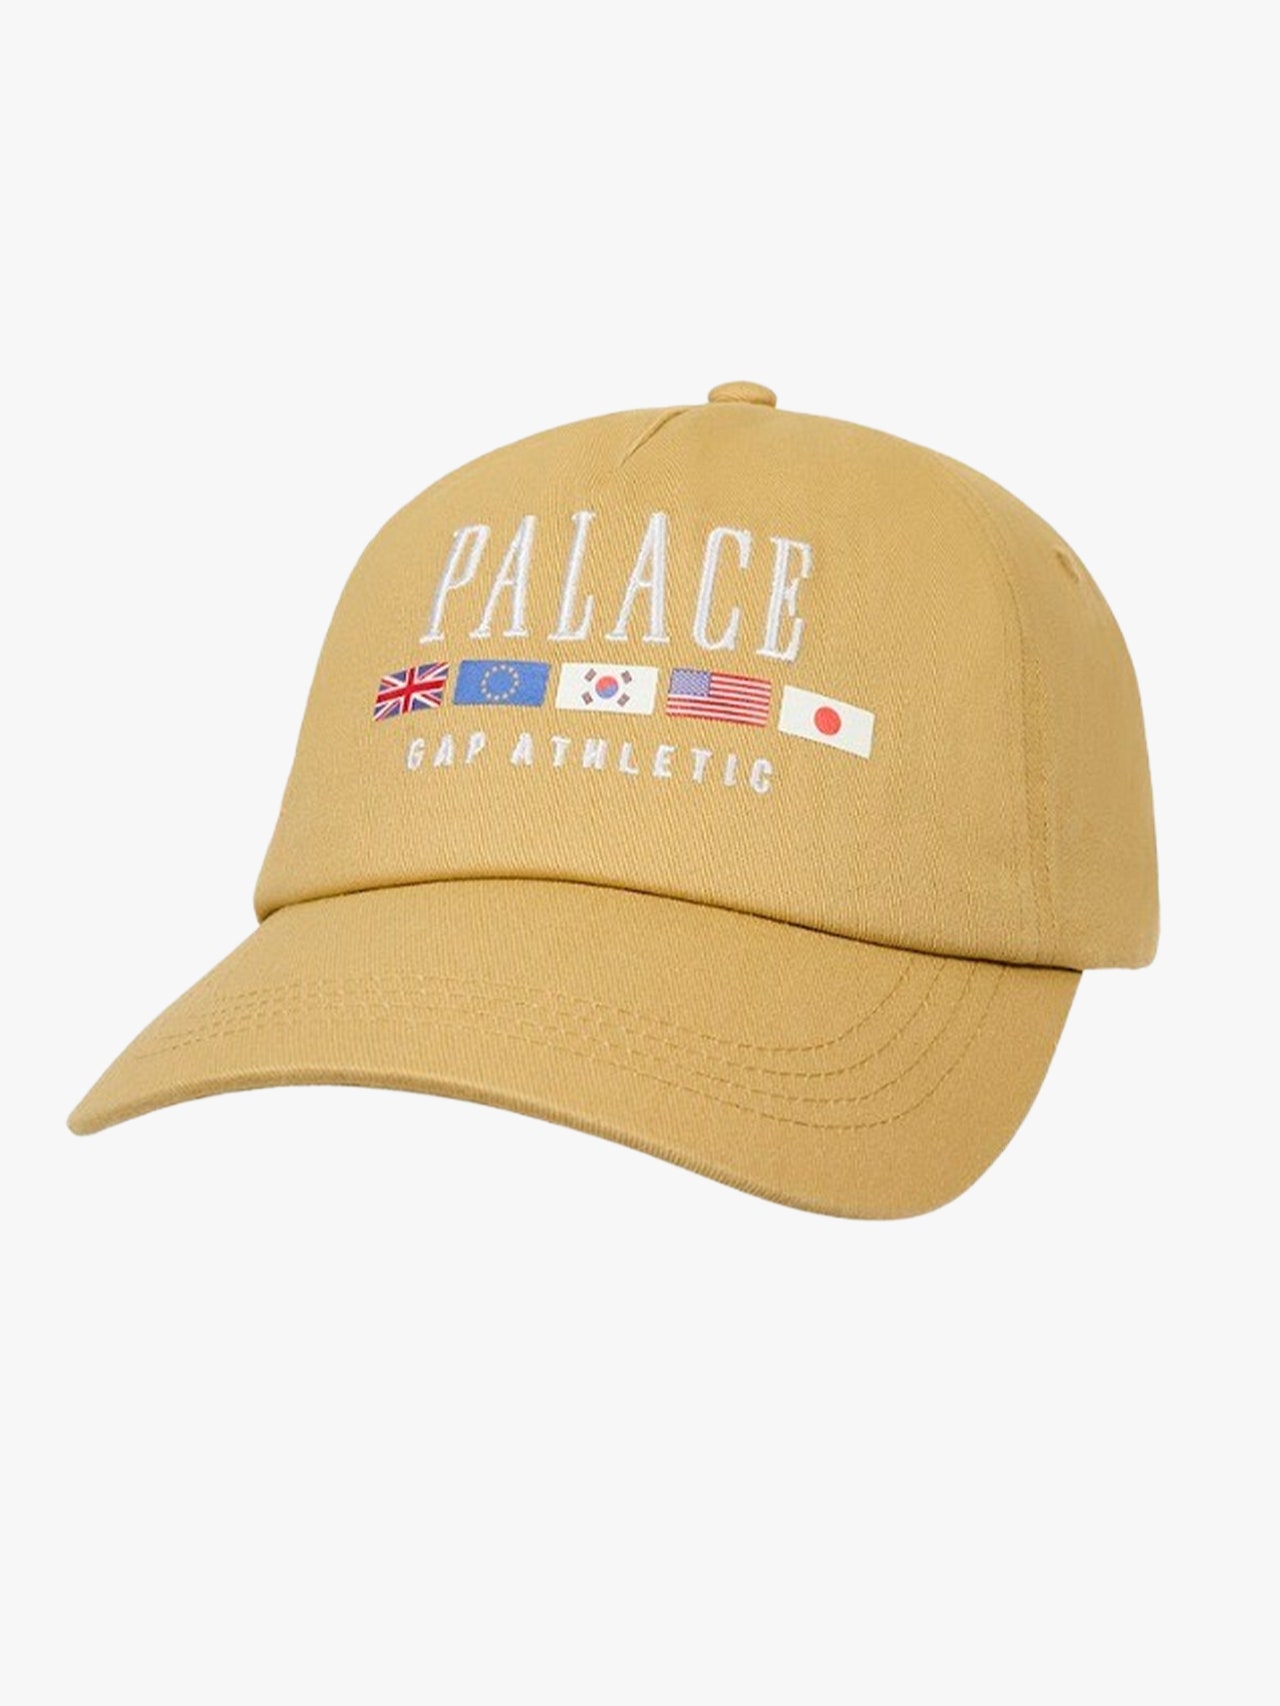 No better way to pay homage to Palace’s global network of skaters and shakers—and protect your peepers in the process.<p>Sign up for GQ’s Daily newsletter and get everything from breaking fashion news to celebrity profiles to exclusive daily deals sent straight to your inbox.</p><a href="https://www.gq.com/newsletter/daily?sourceCode=msnsend">Sign Up Now</a>